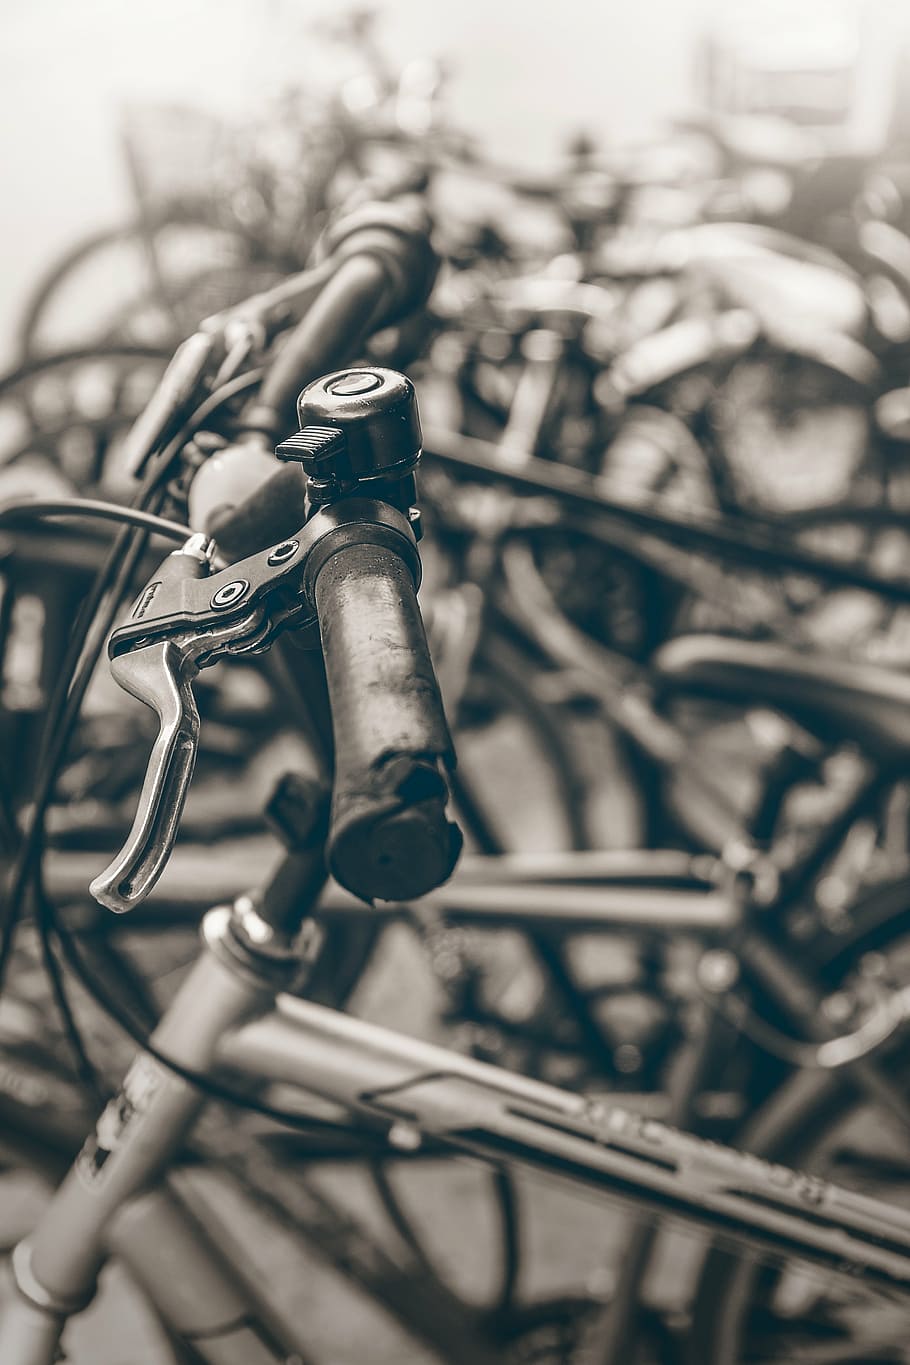 grayscale photo, bikes, bicycles, wheels, gear, black, white, black and white, travel, outdoor